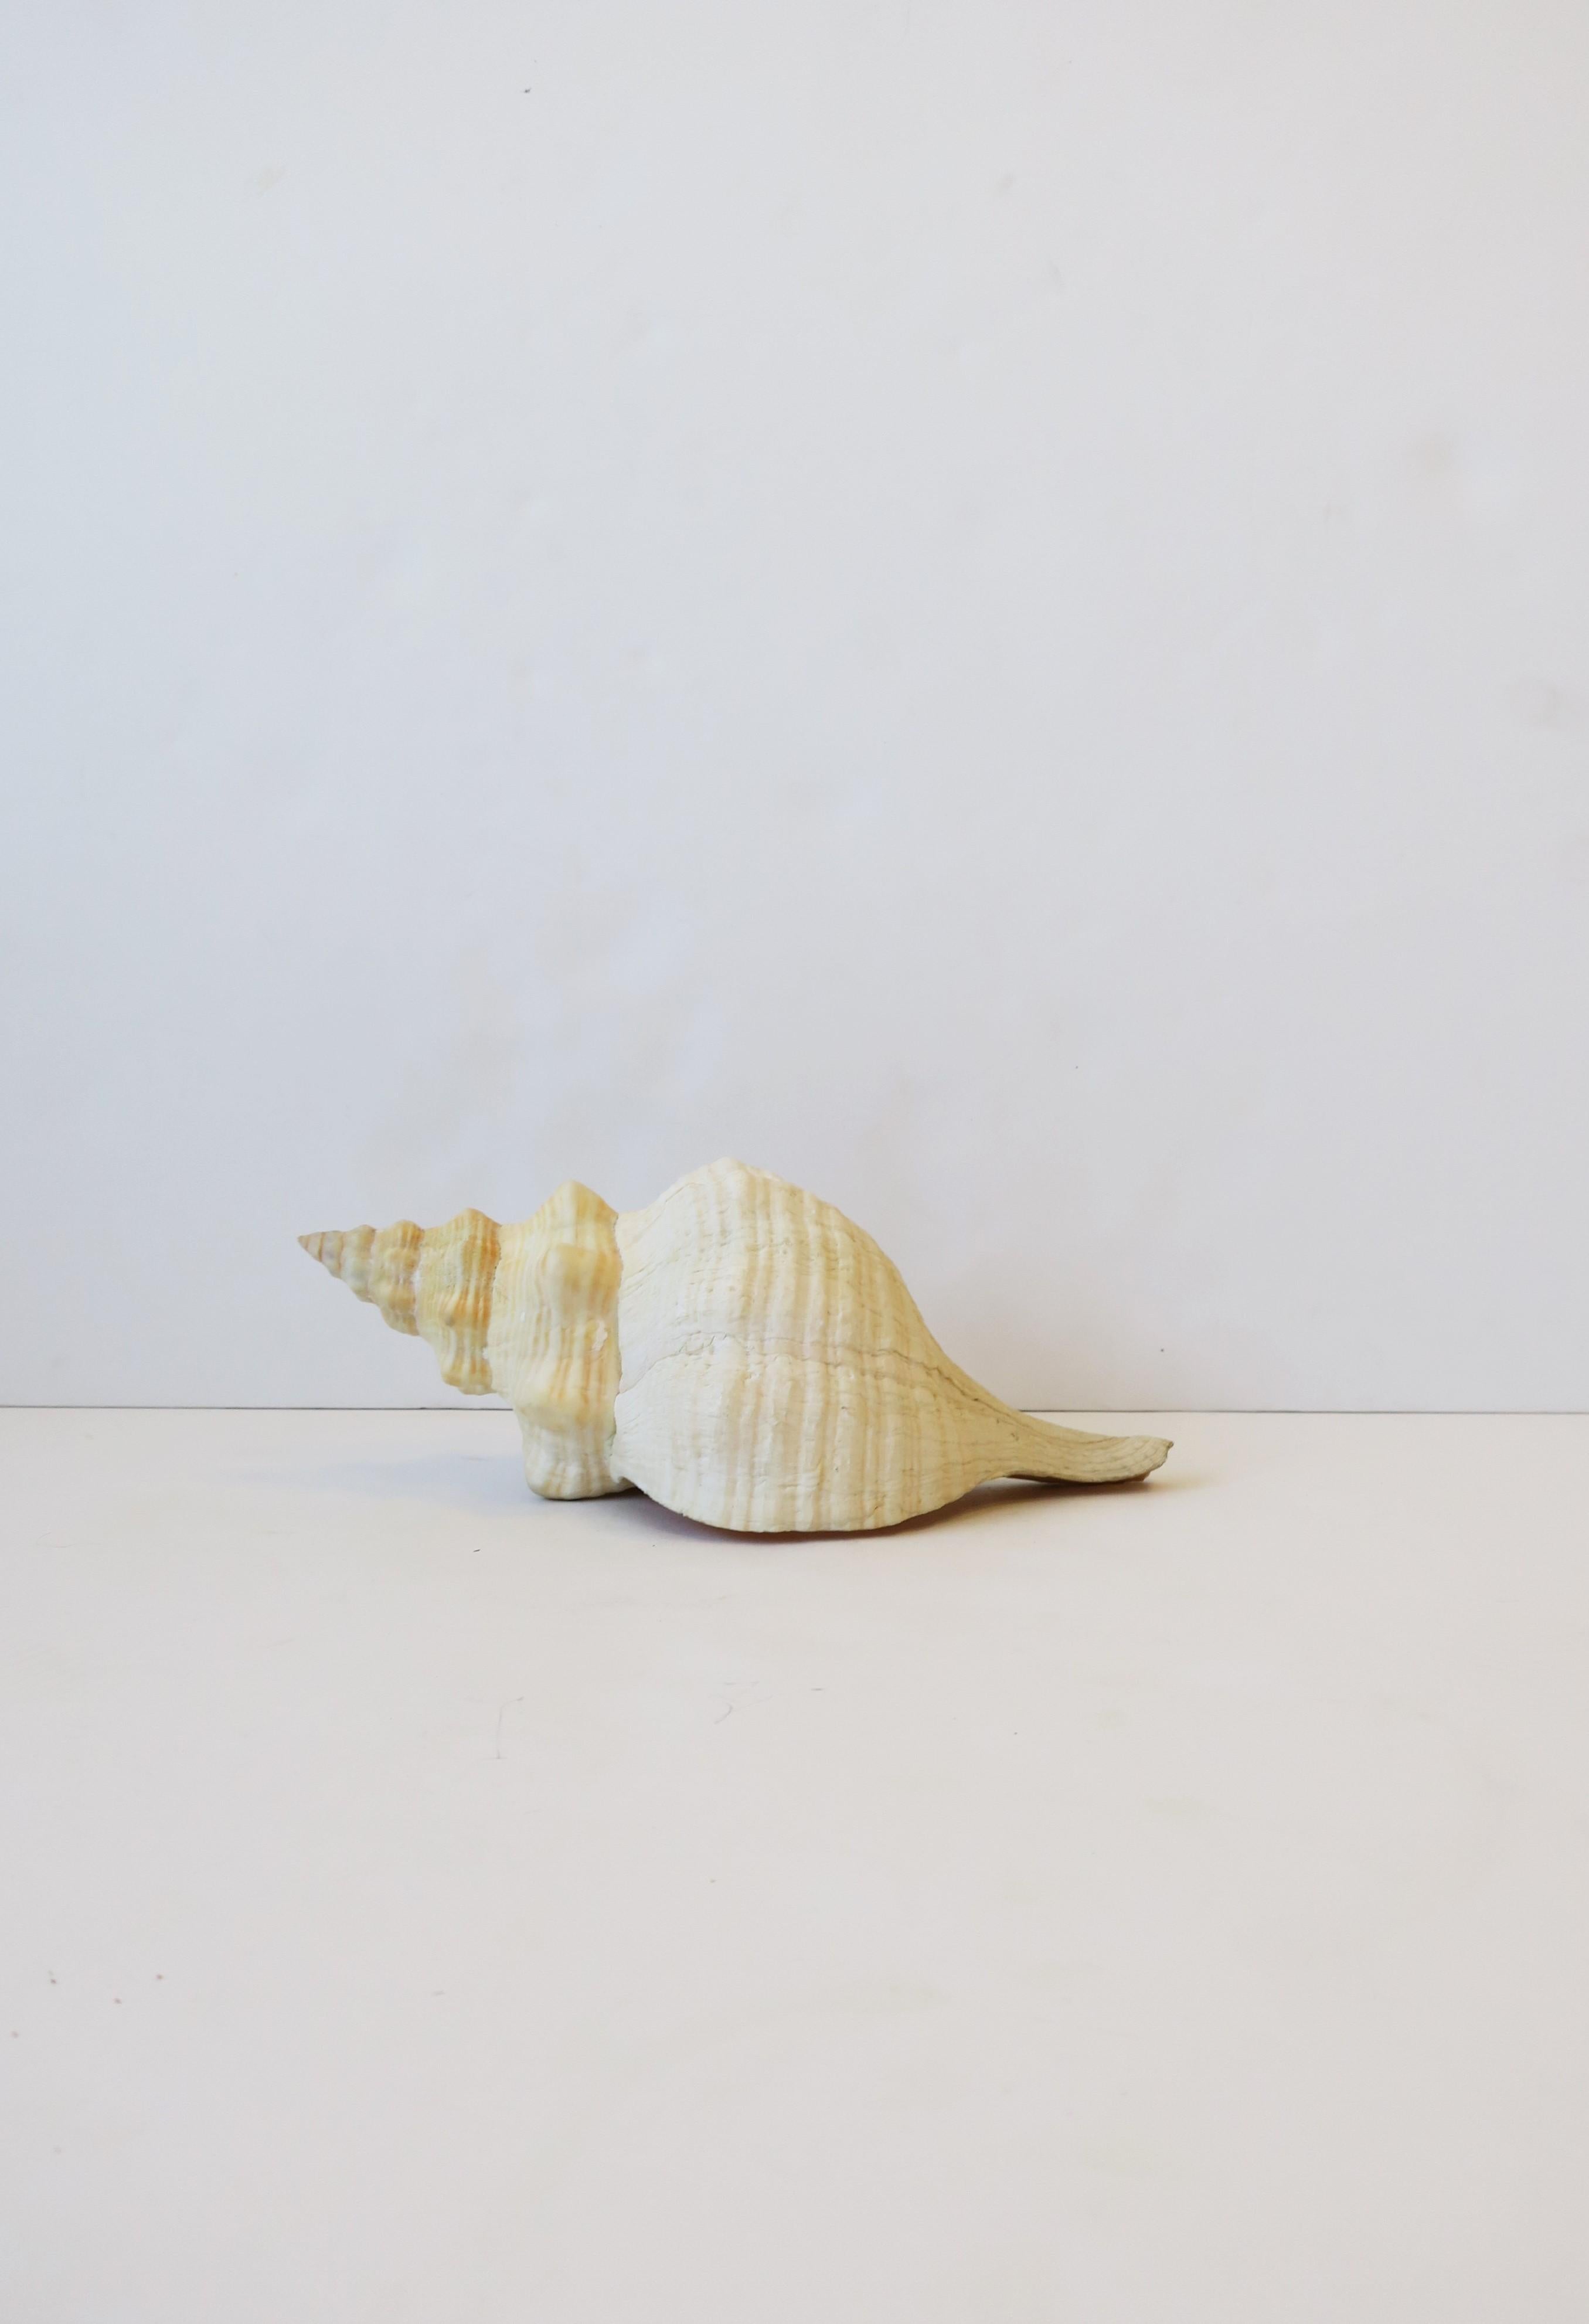 A relatively large natural seashell from the sea. A great decorative object as shown. In neutral hues. Shell is a nice size as demonstrated. Dimensions: 5.5